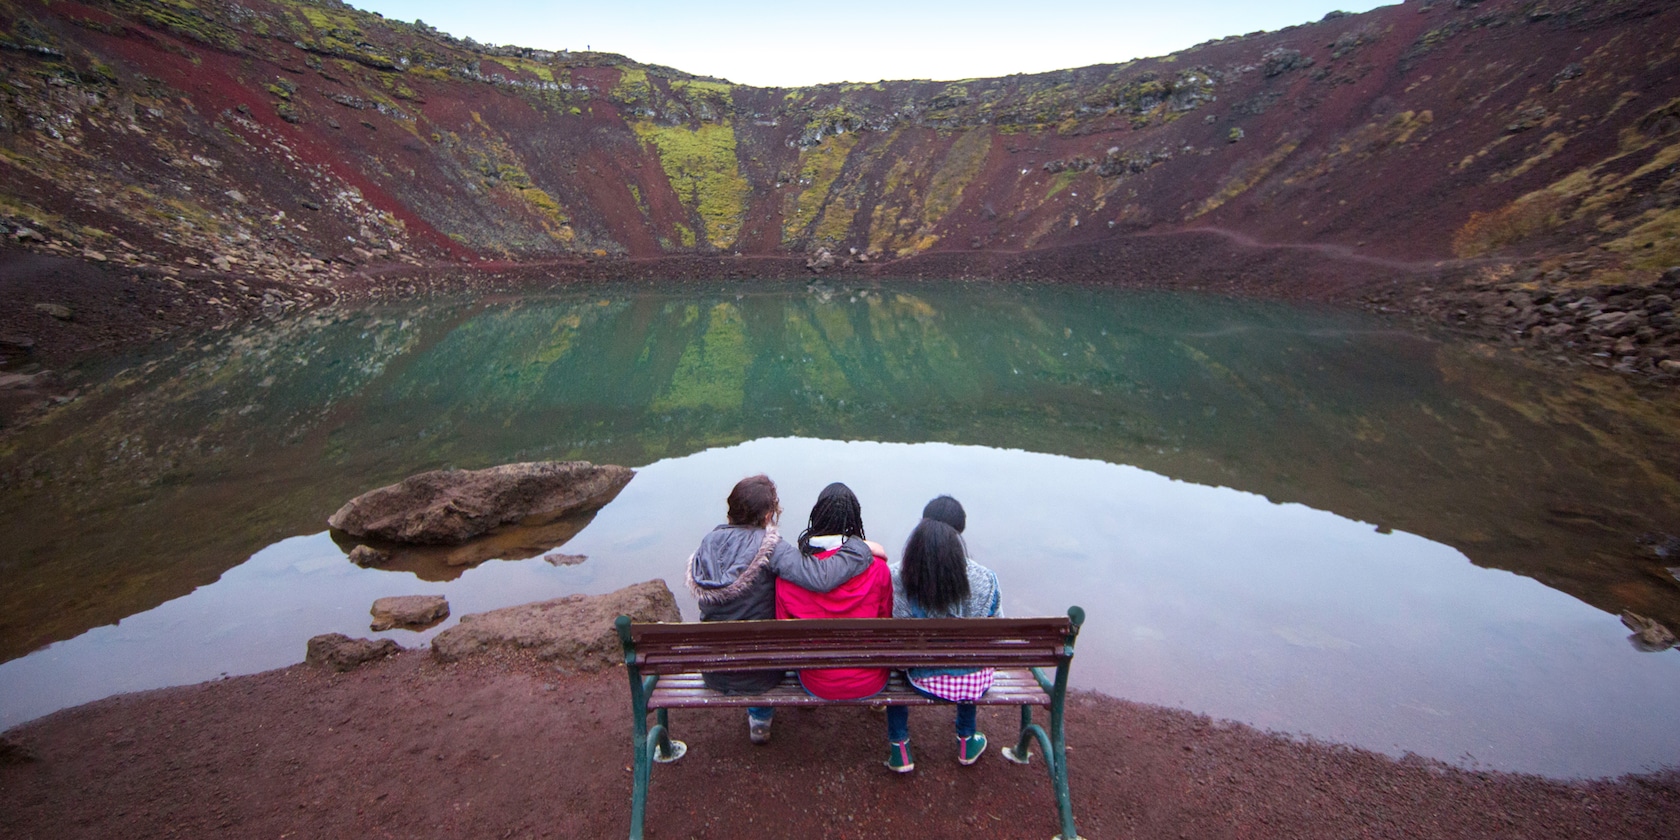 Three girls sitting on a bench overlooking a volcanic crater lake in Iceland